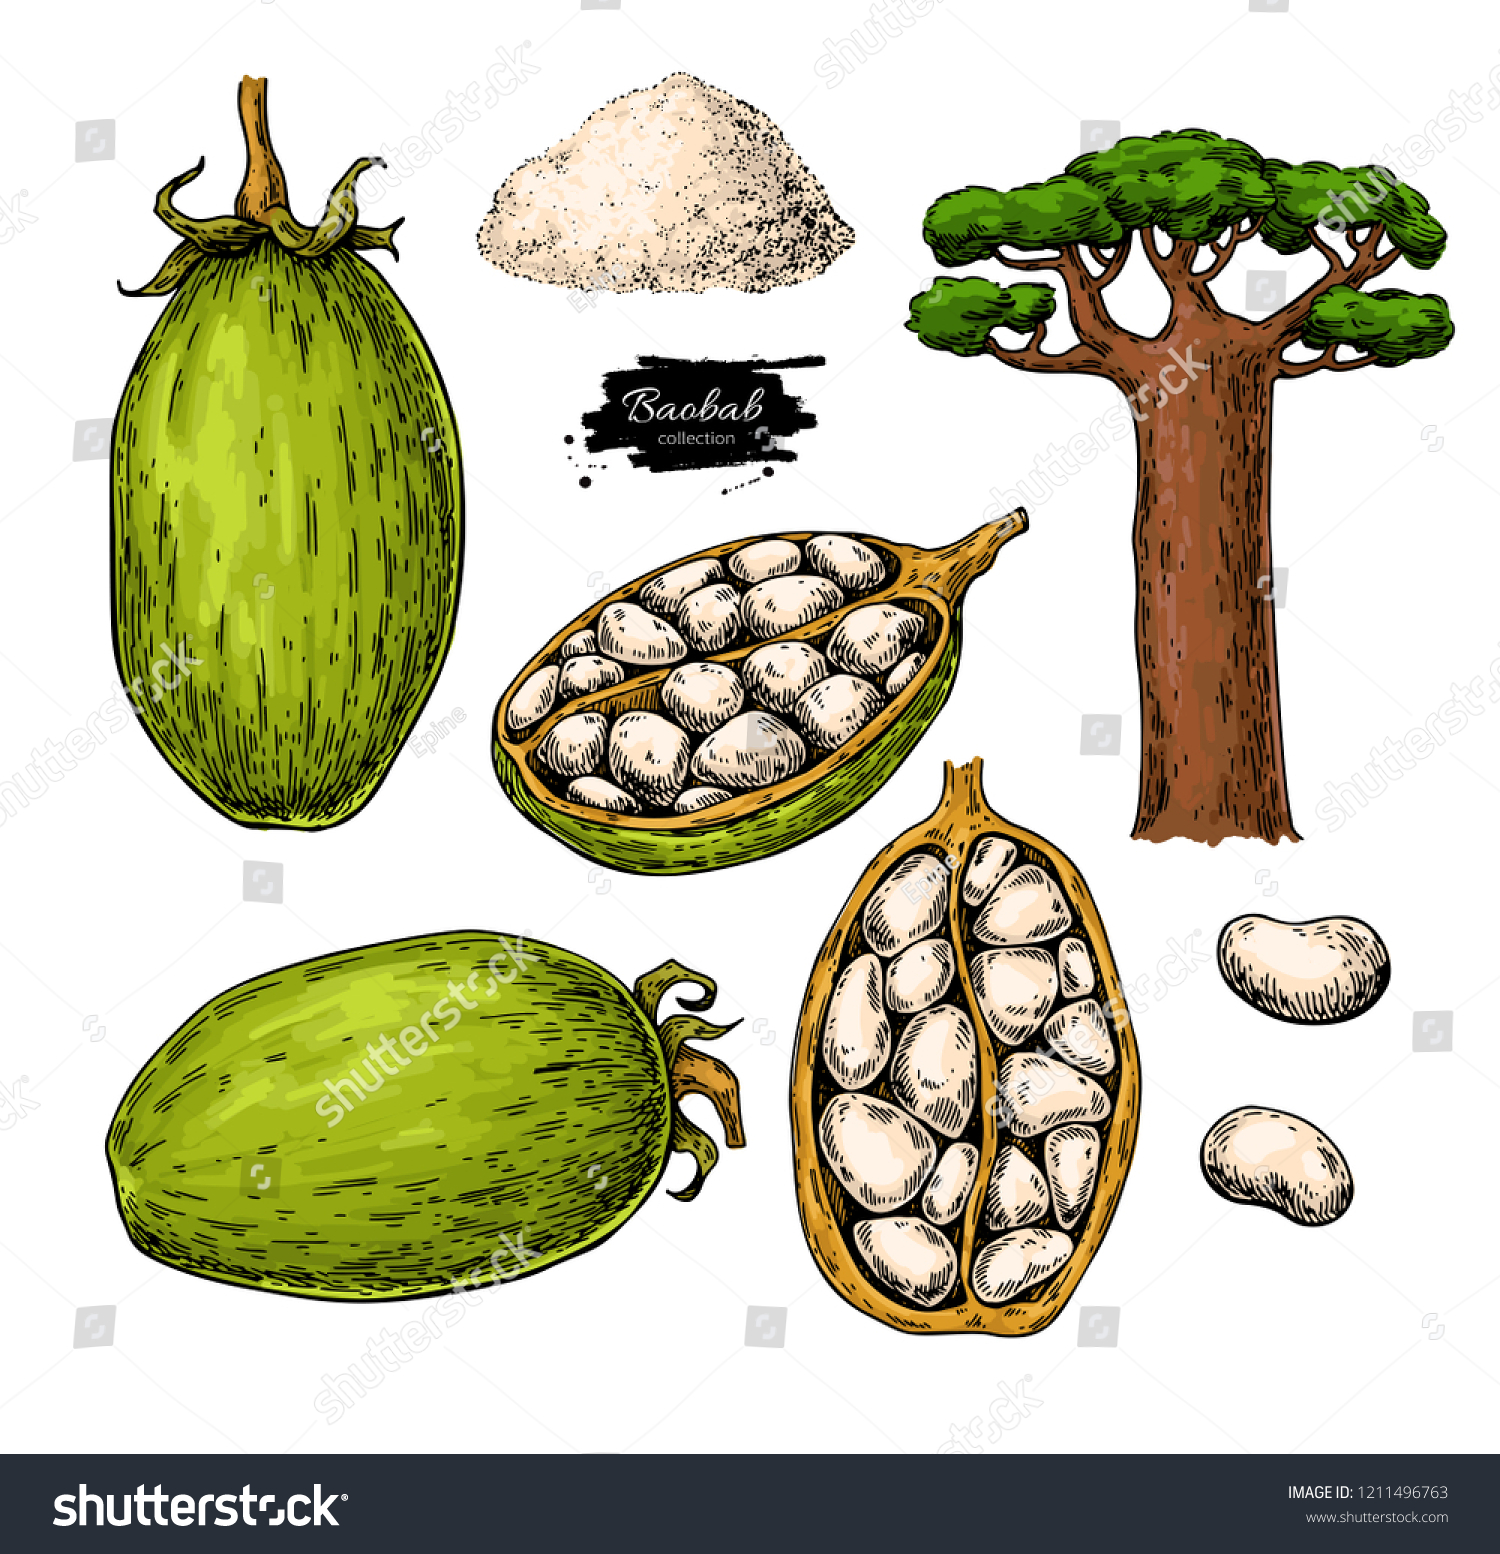 SVG of Baobab vector superfood drawing. Organic healthy food sketch. Great for banner, poster, label. Isolated hand drawn  illustration on white background svg